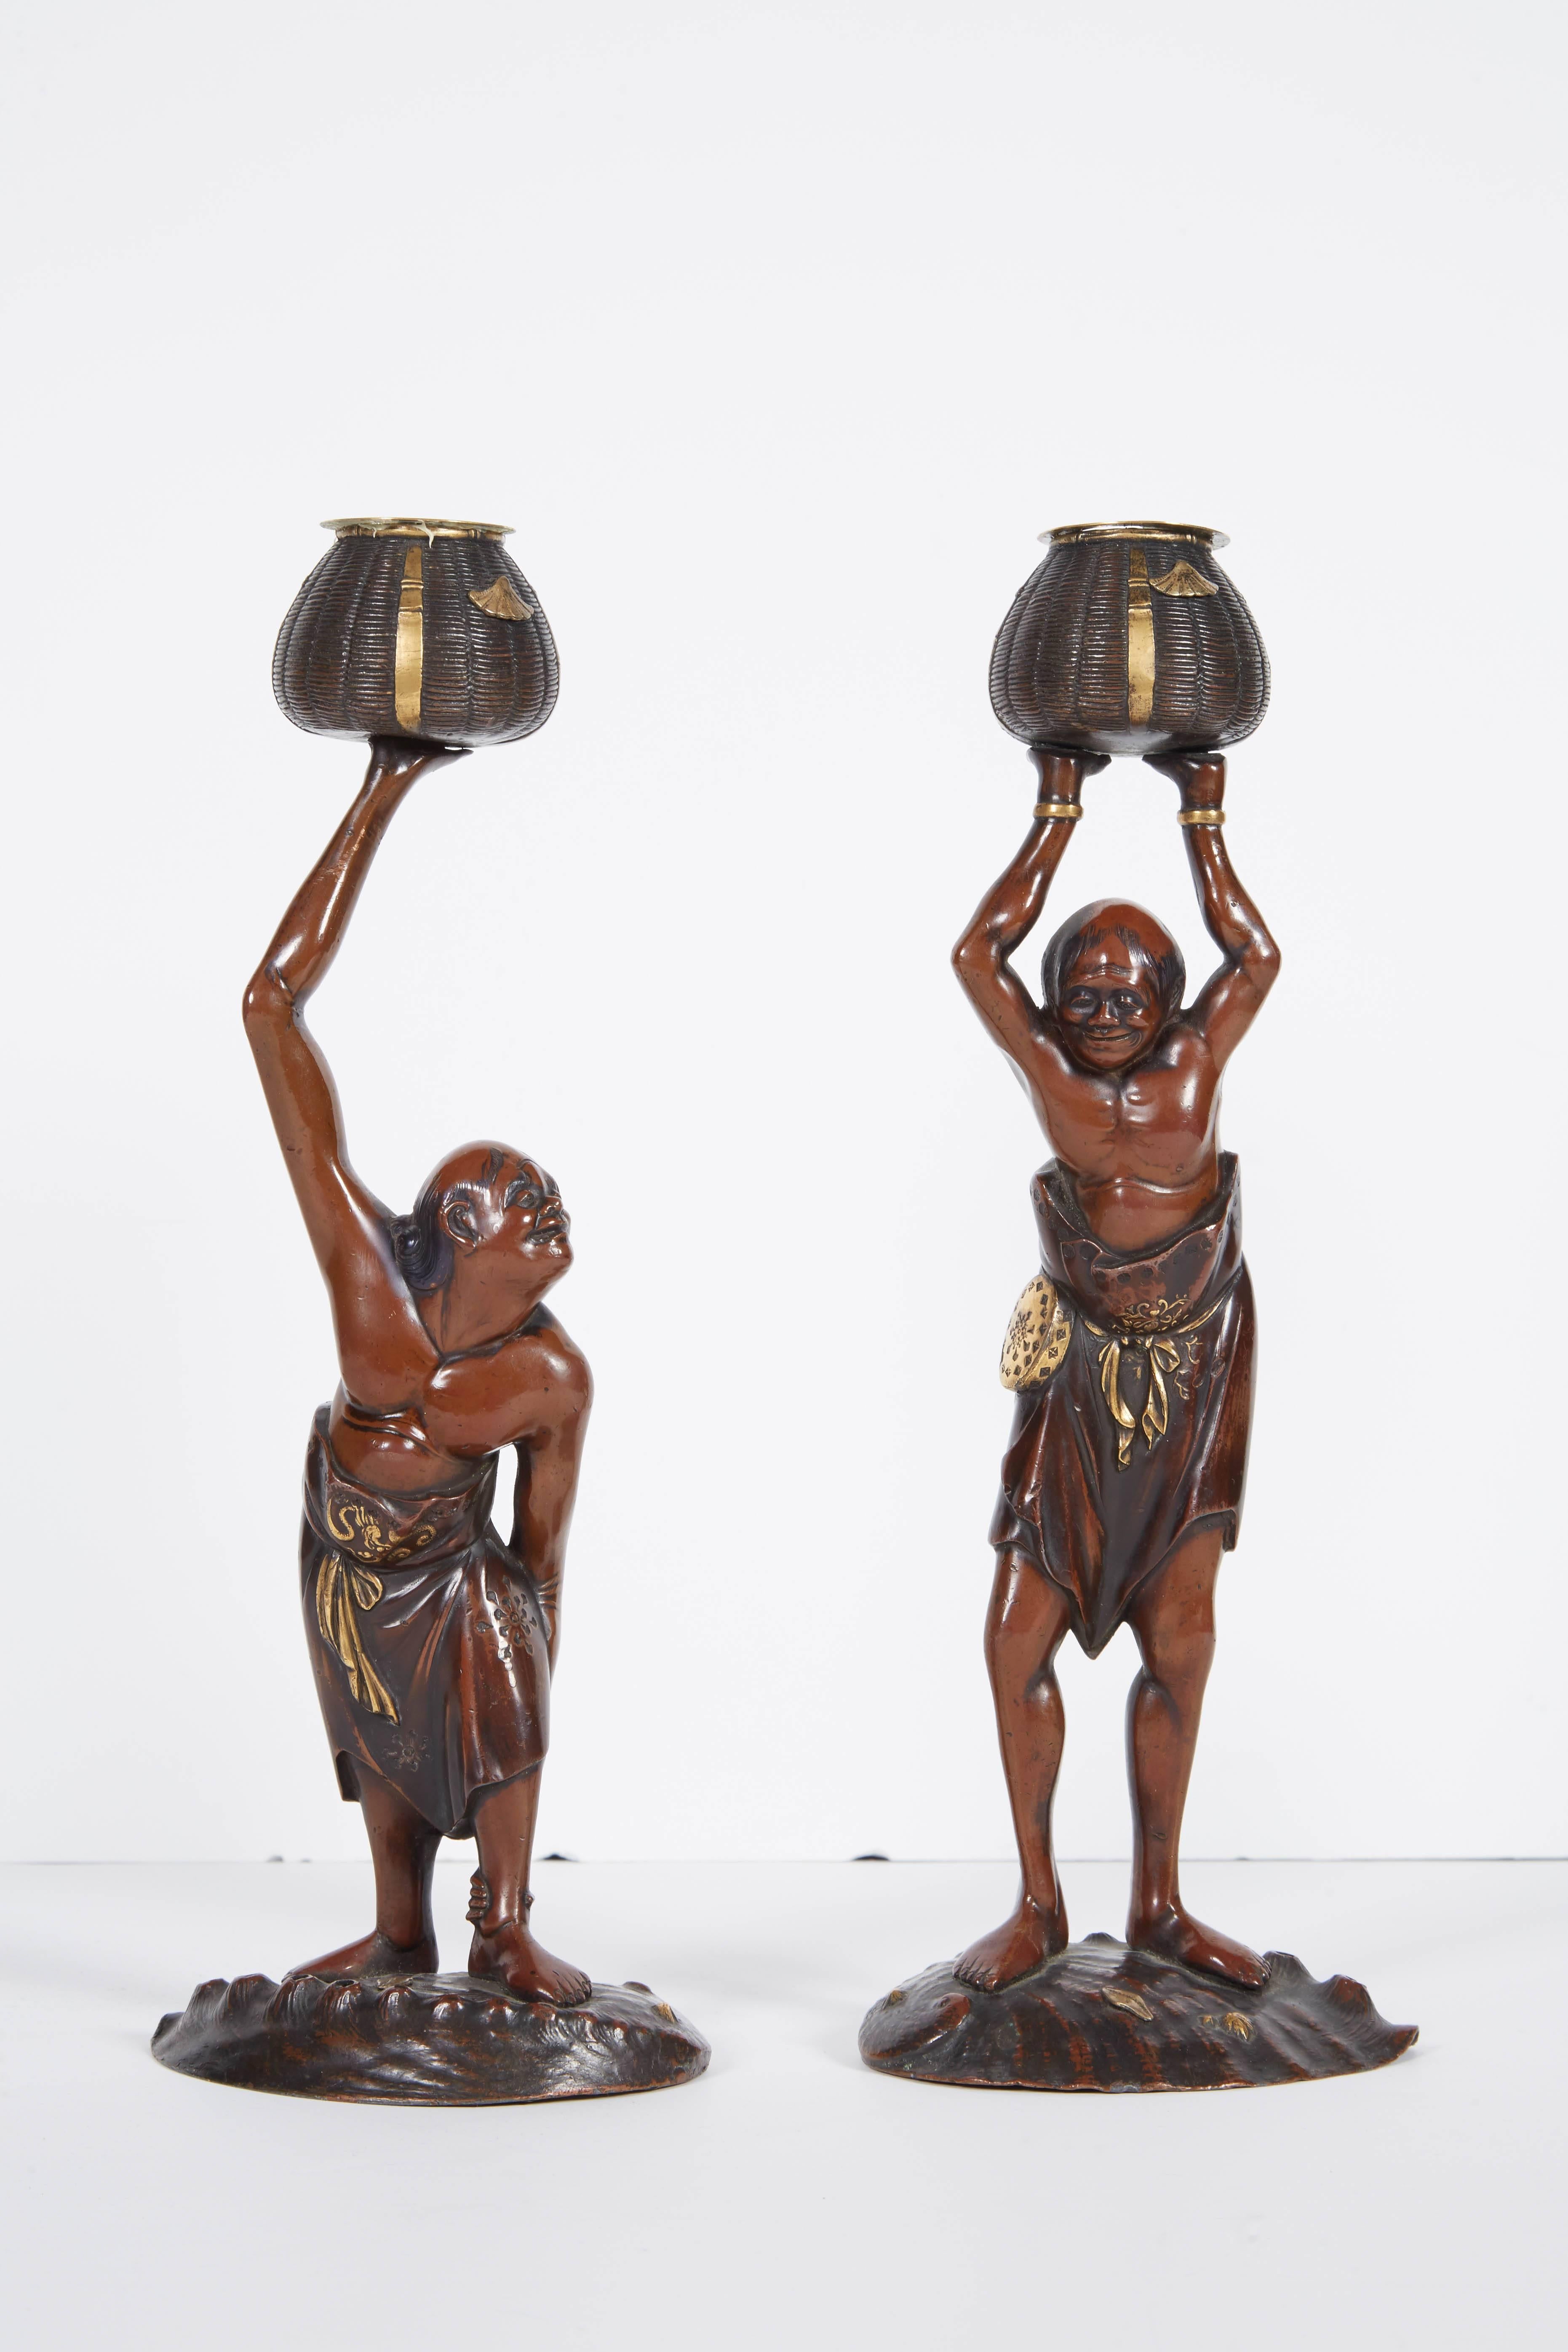 Exquisite pair of Japanese Meiji mixed metal bronze Oni figures from Japanese Mythology.

Depicting Ashinaga and Tenagu - they formed a partnership to go fishing. The long-legged figure would carry the other one on his back into the water and the